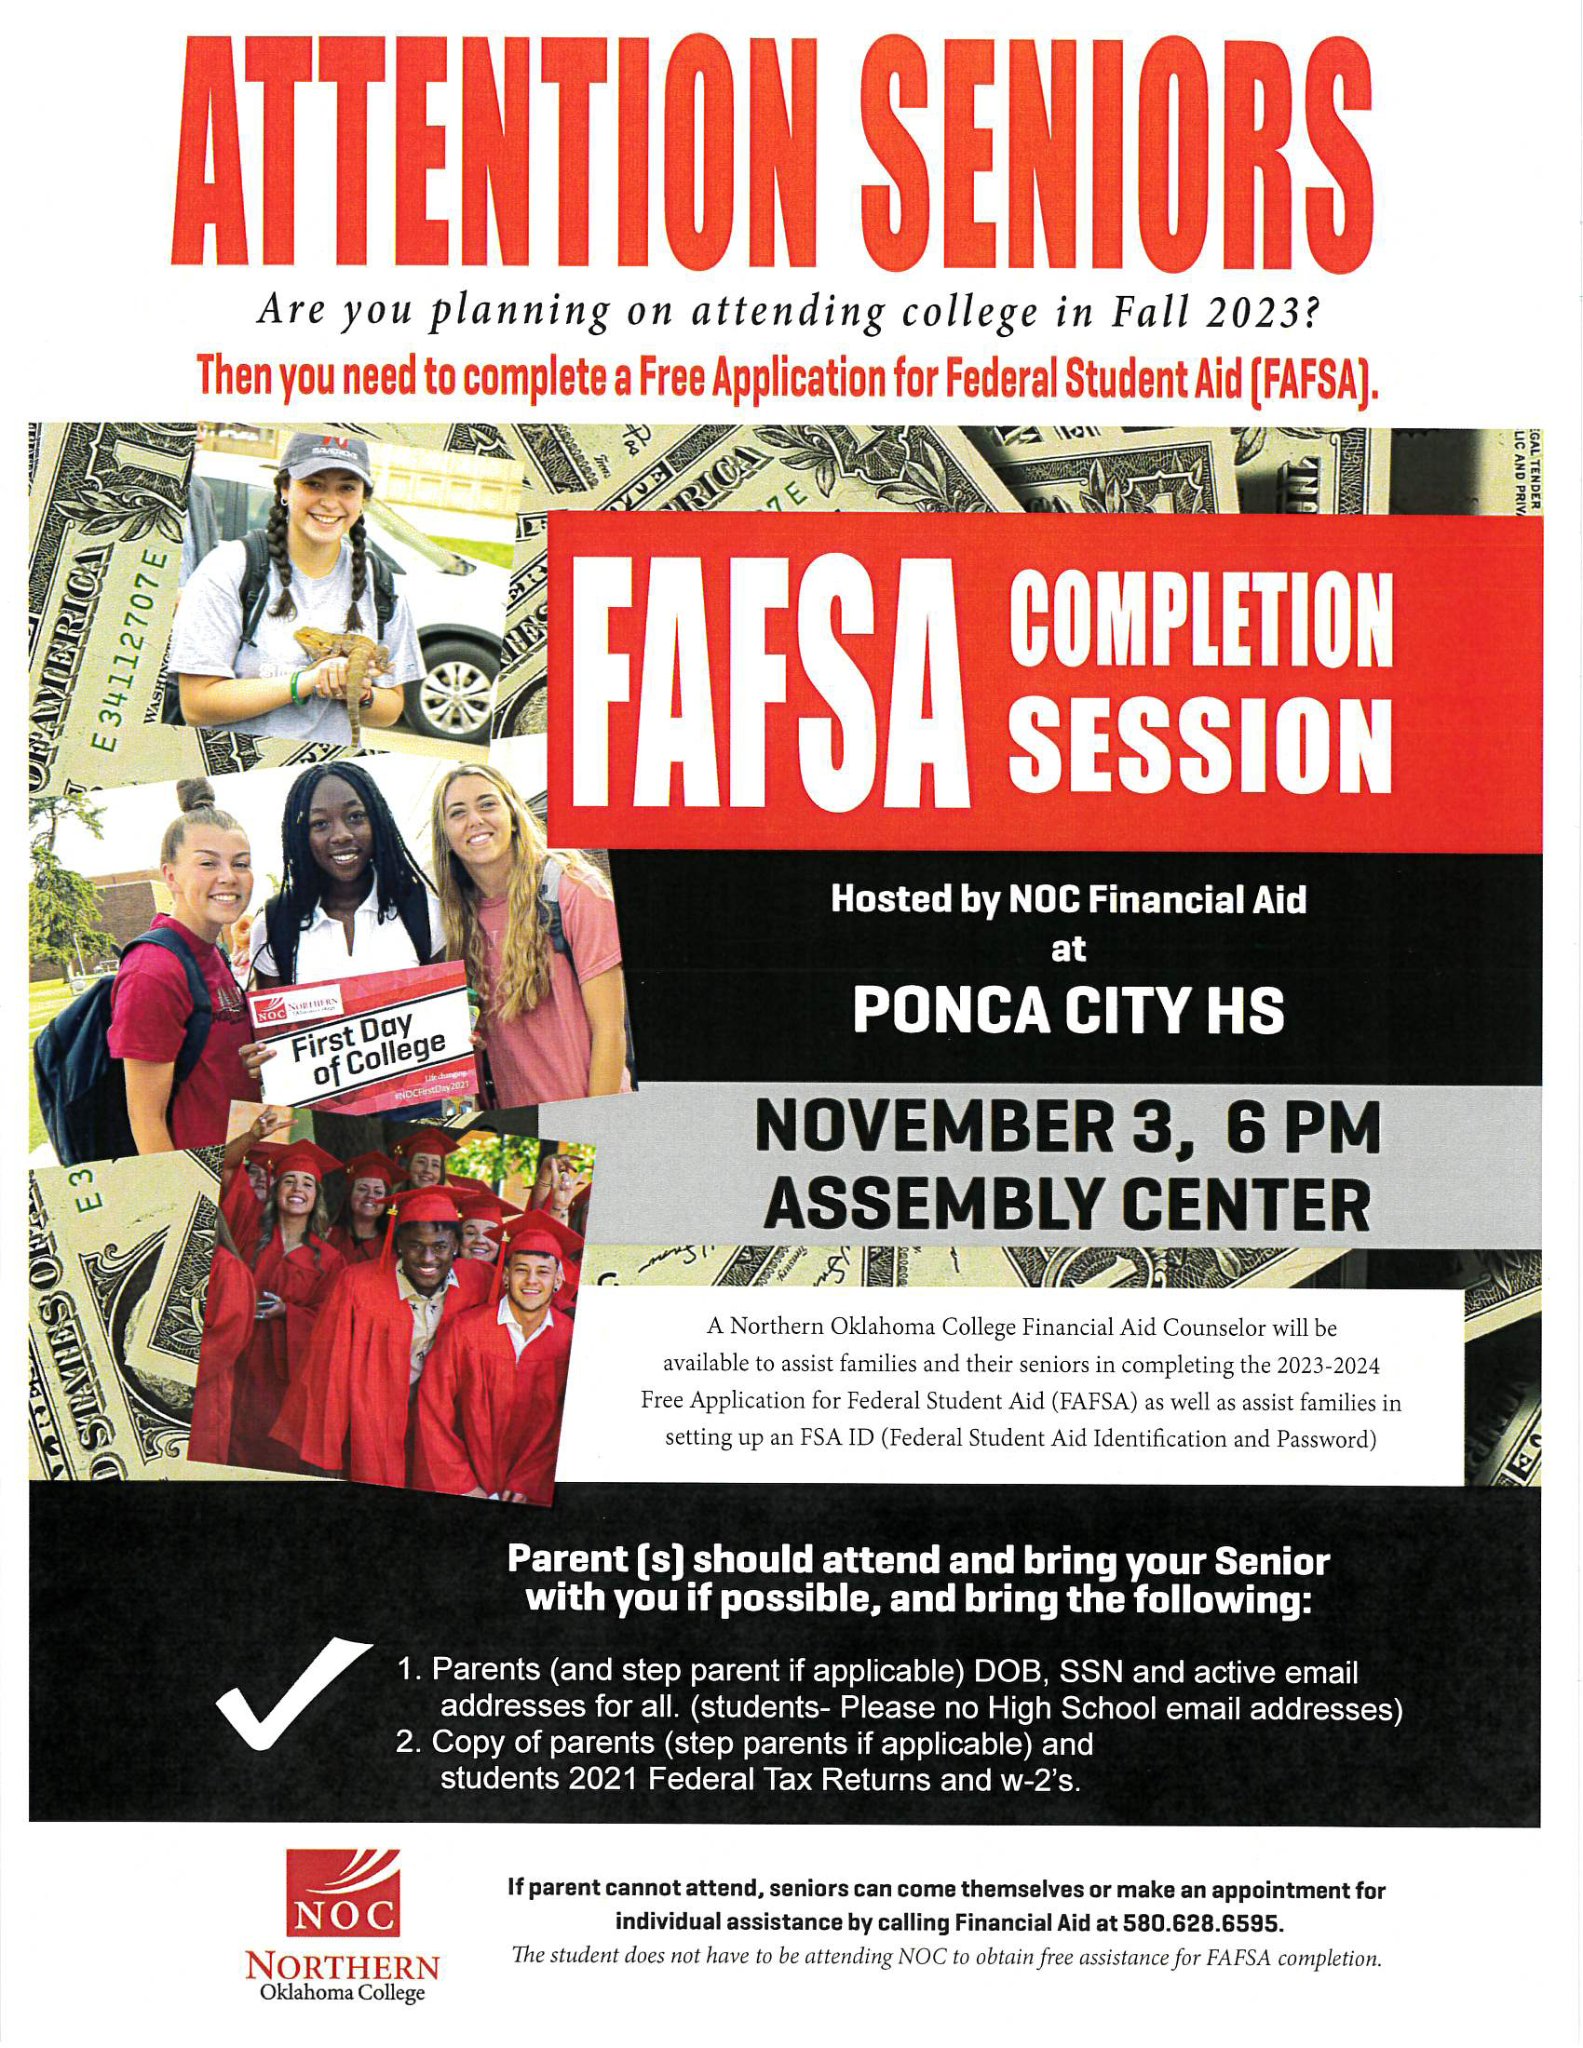 Po-Hi to Host FAFSA Night for Seniors and Parents